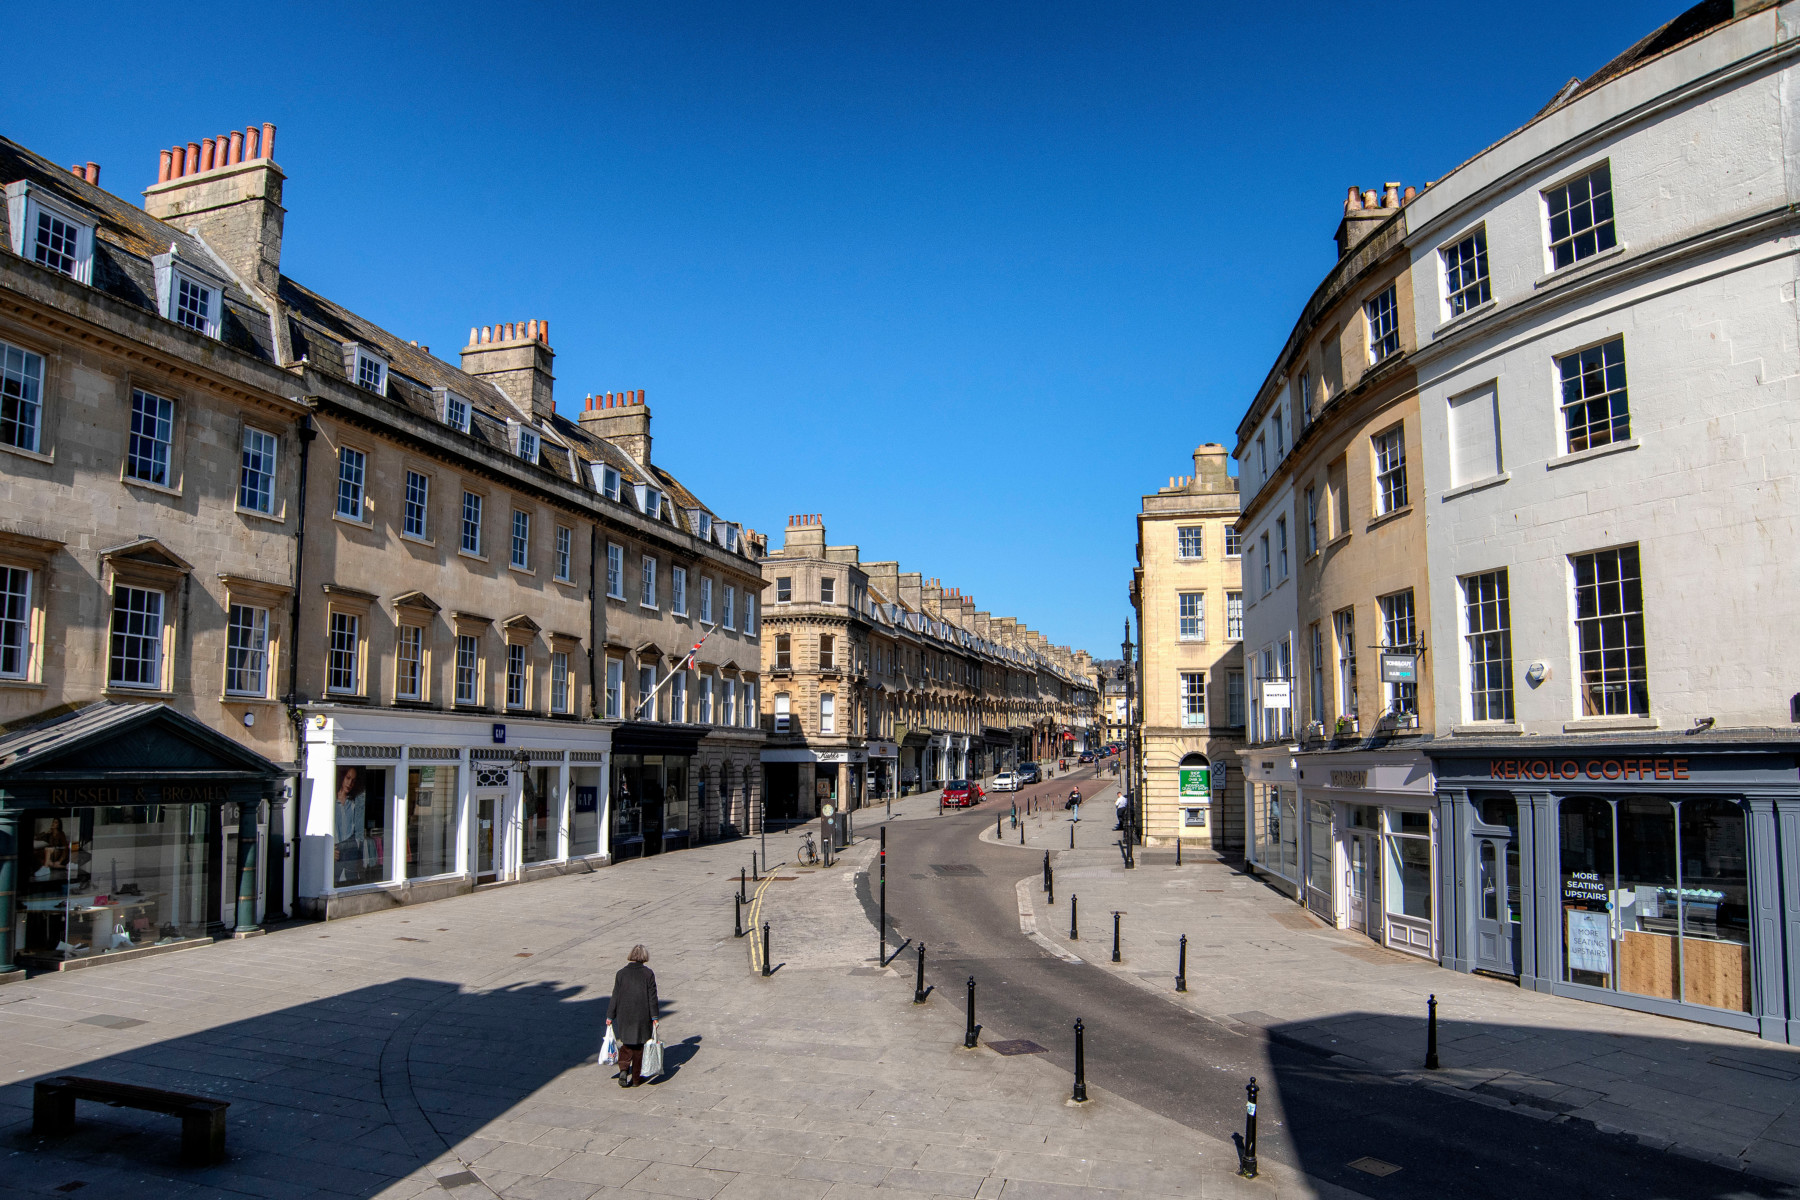 Tourists have deserted the shops of picturesque Bath in Somerset as the lockdown bites